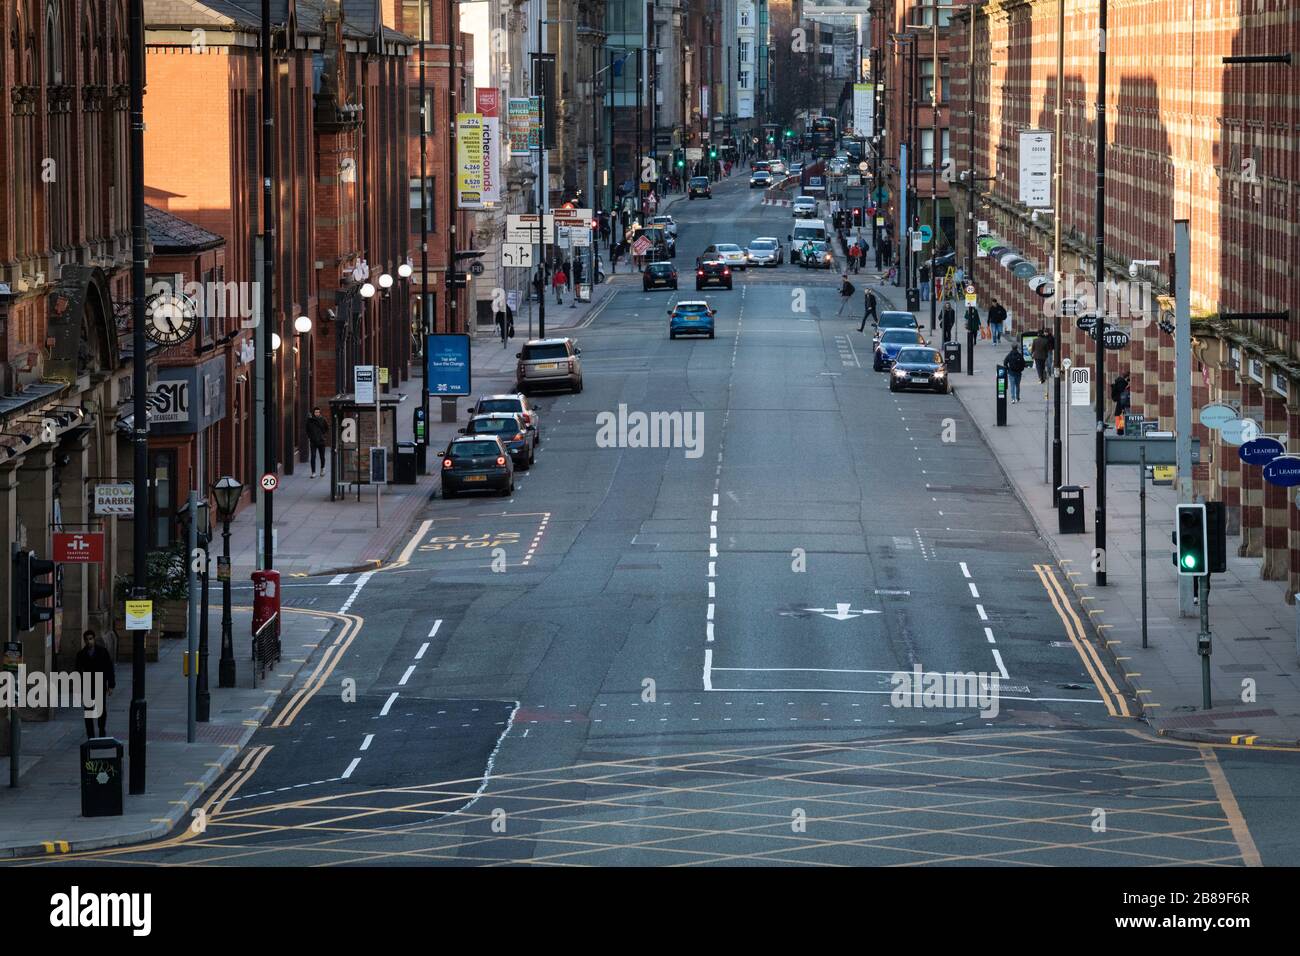 Manchester, UK. 20 March, 2020. Friday evening rush-hour on one of the busiest roads in the city centre is considerably quieter due to the impact of the coronavirus. Credit: Andy Barton/Alamy Live News Stock Photo